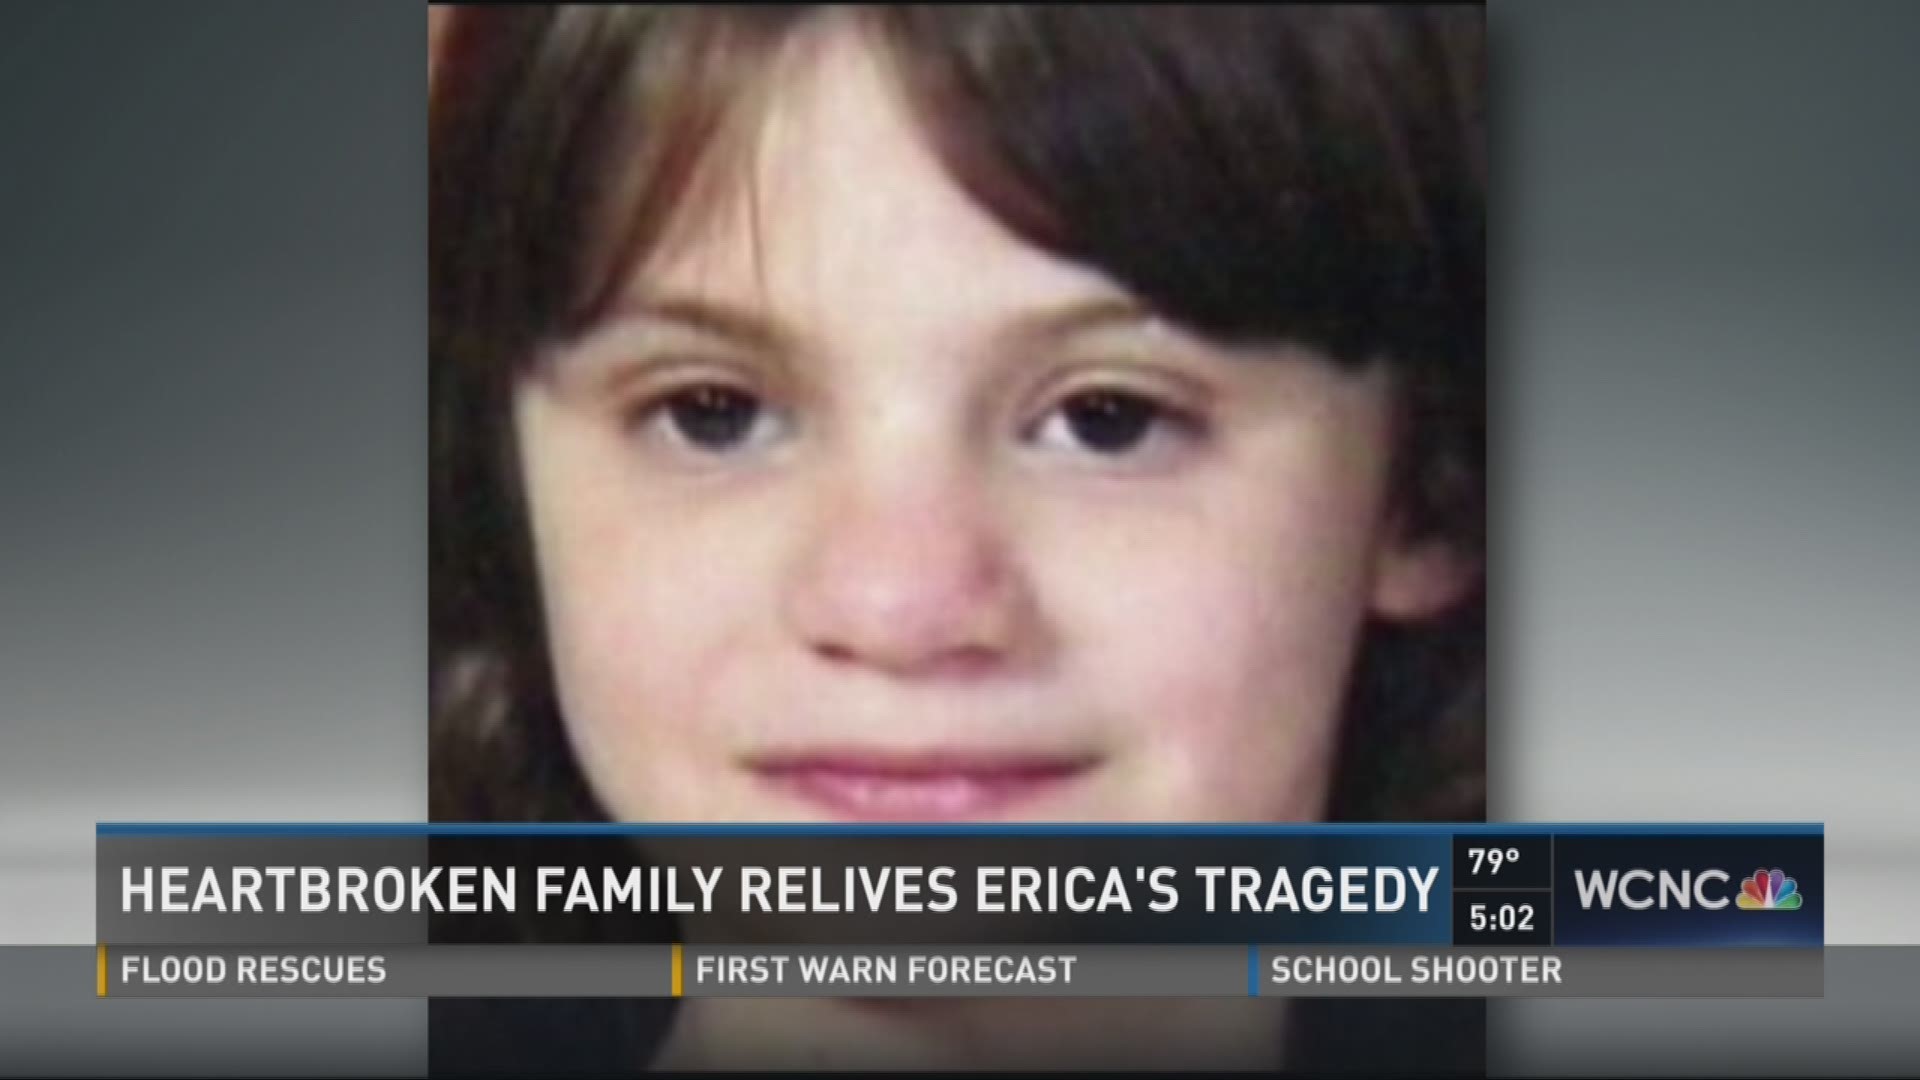 As the search for Erica Parsons dragged on for years, her paternal aunt decided to hire a private investigator to help find her niece.